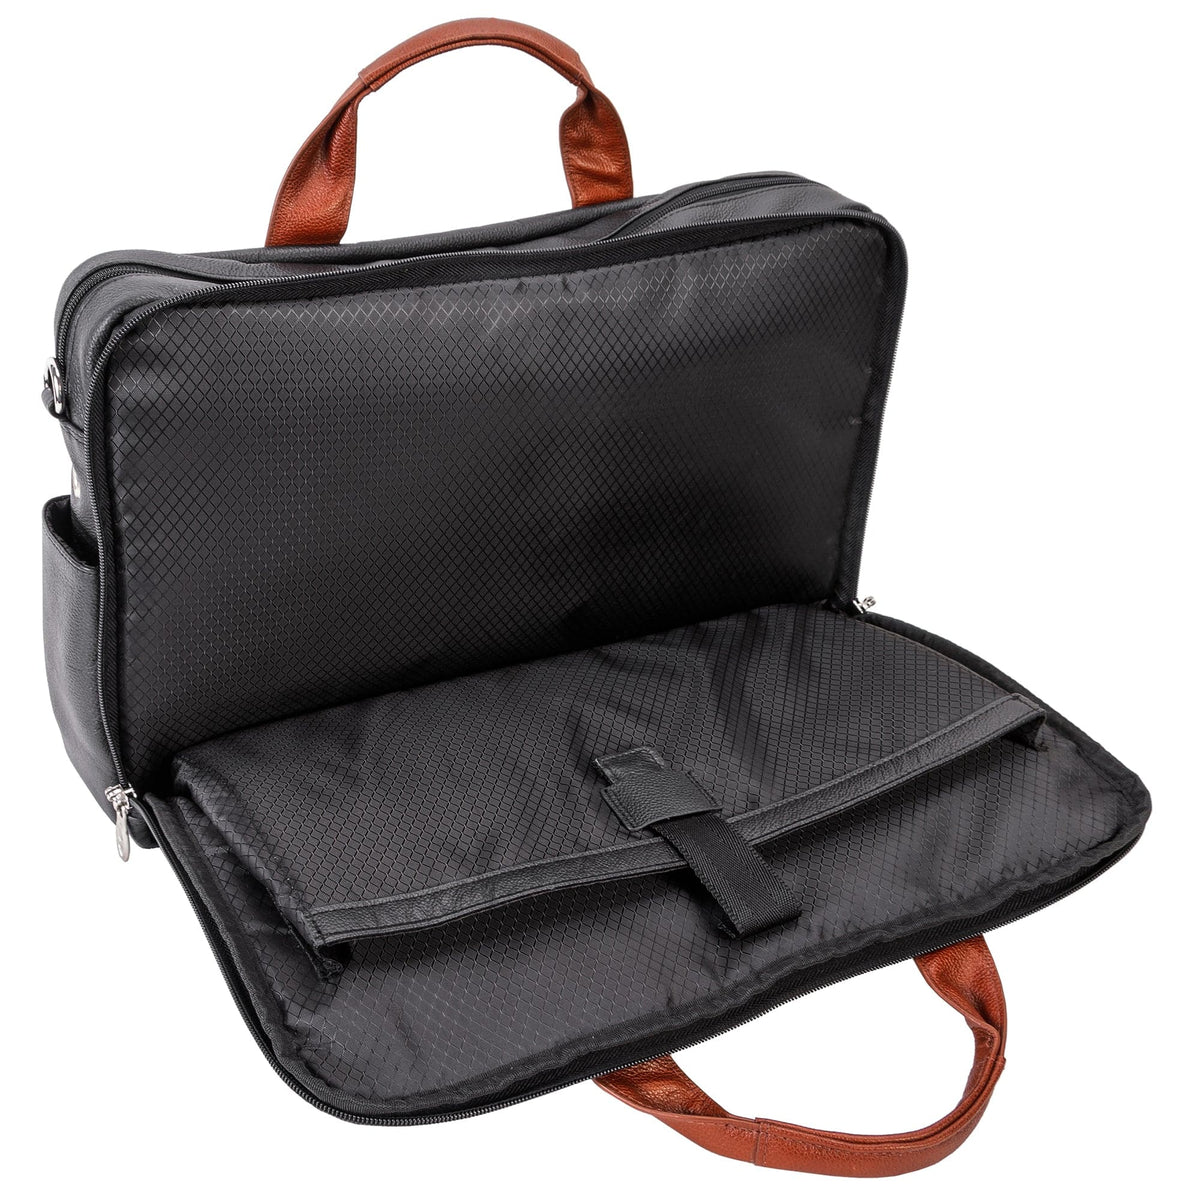 McKlein U Series Southport 17" Two-Tone Dual-Compartment Laptop and Tablet Leather Briefcase